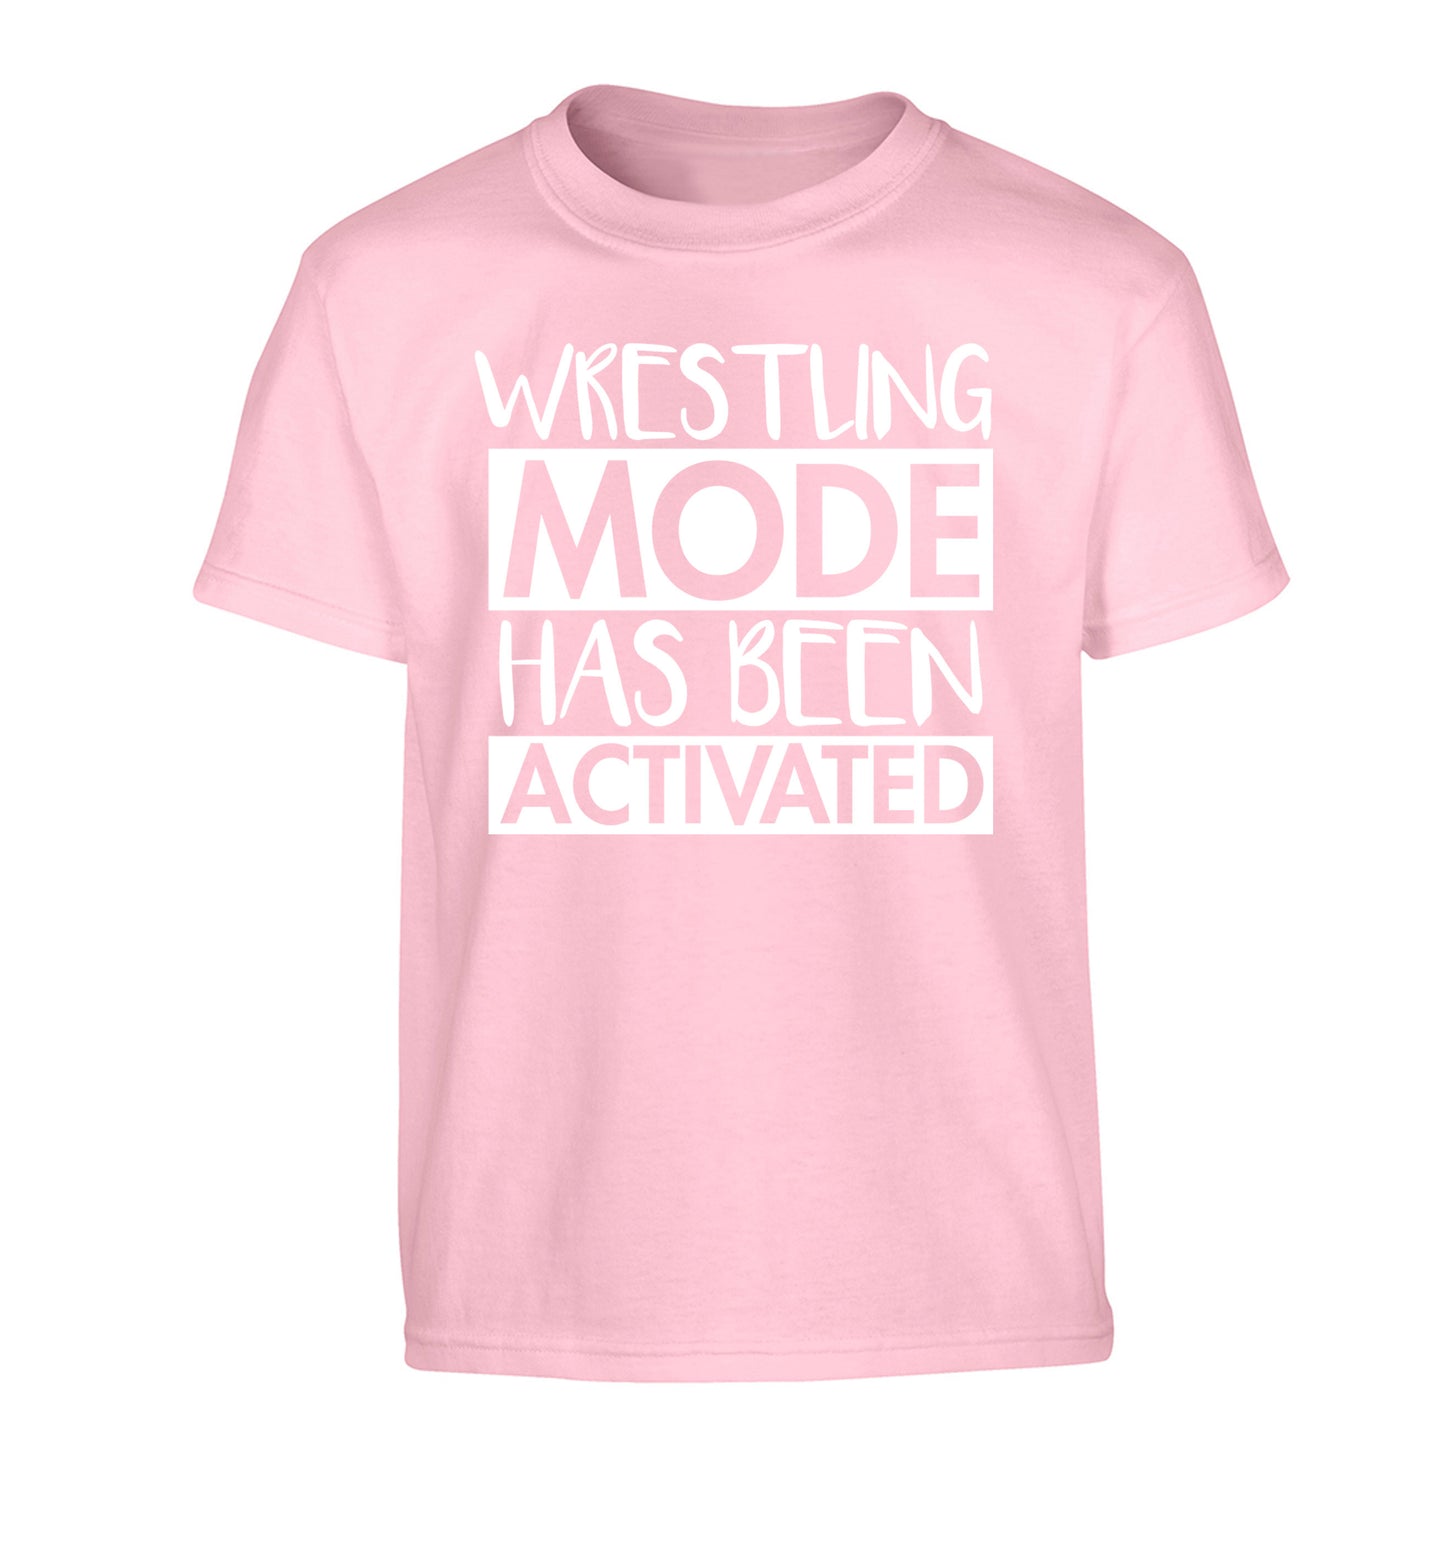 Wresting mode activated Children's light pink Tshirt 12-14 Years